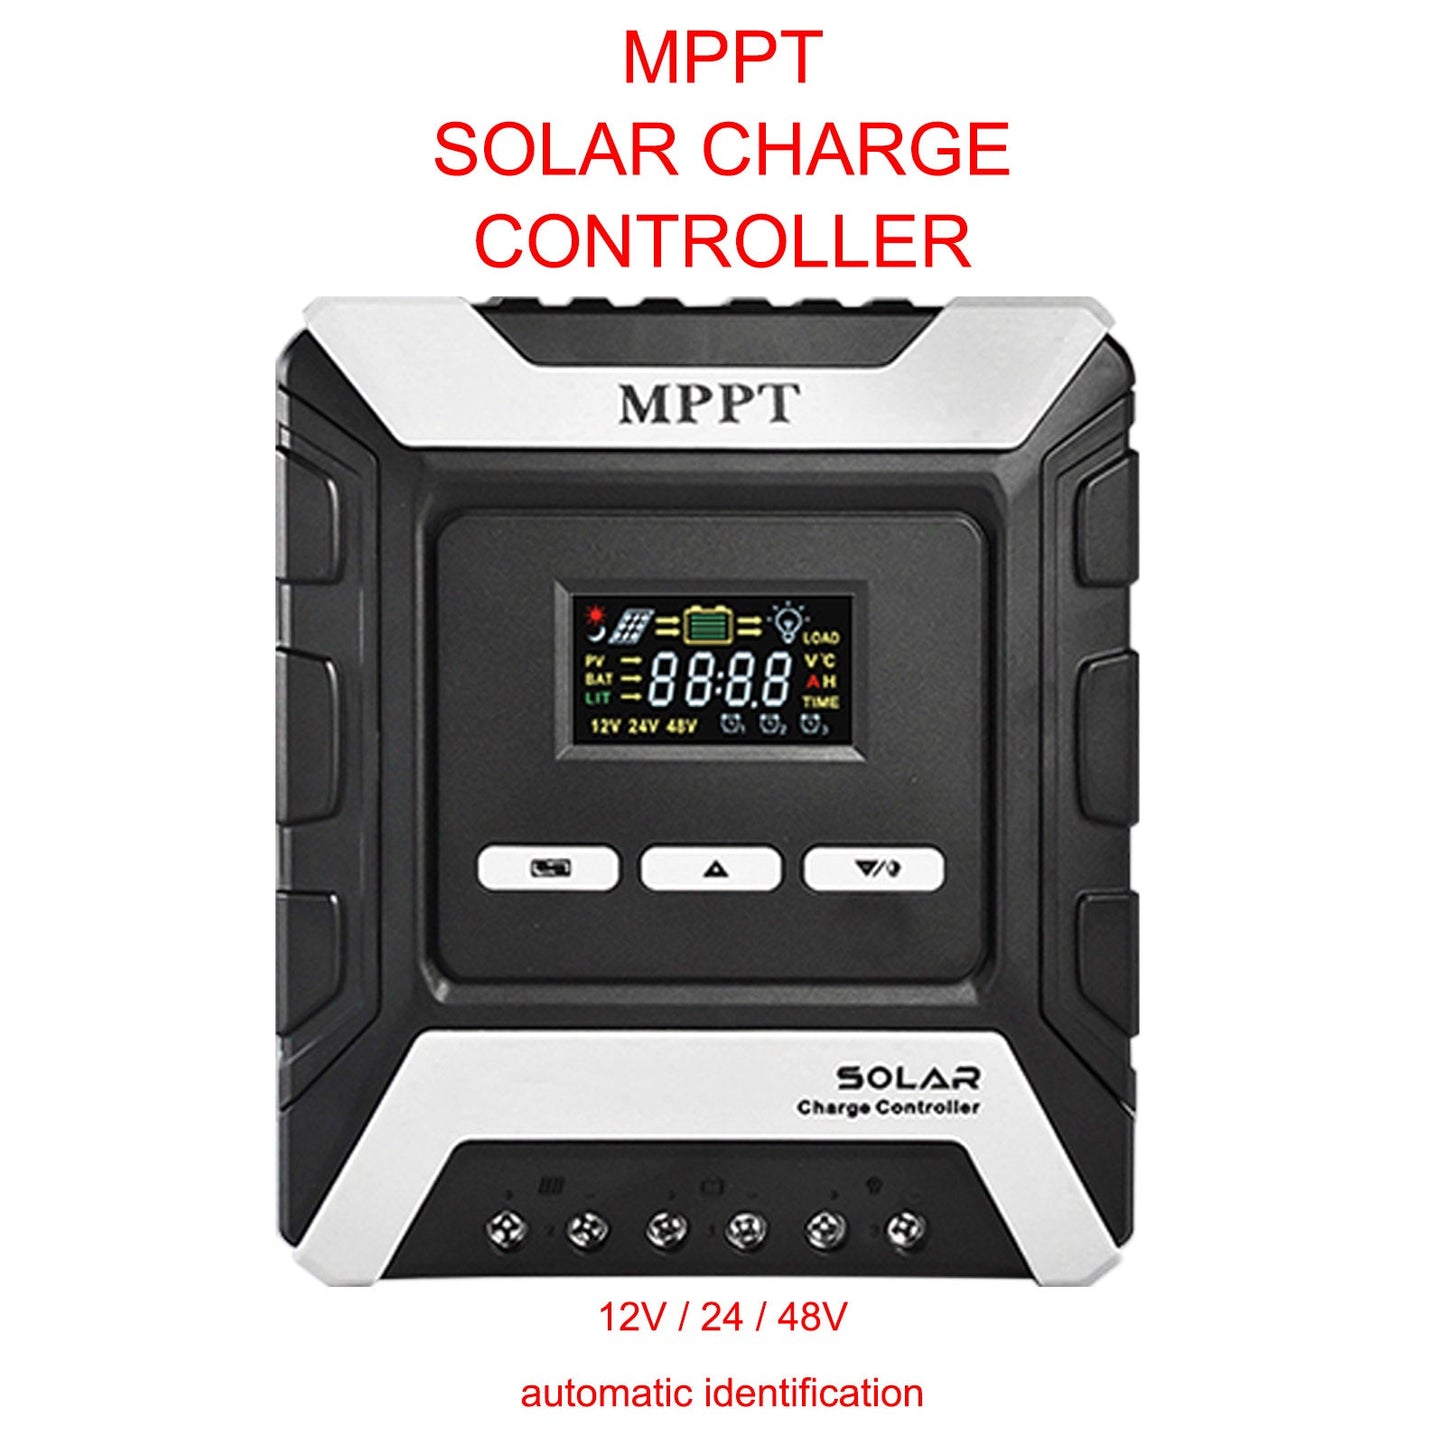 30A MPPT AUTO Solar Charge Controller Charger 12V/24V/48V with Color LCD Display